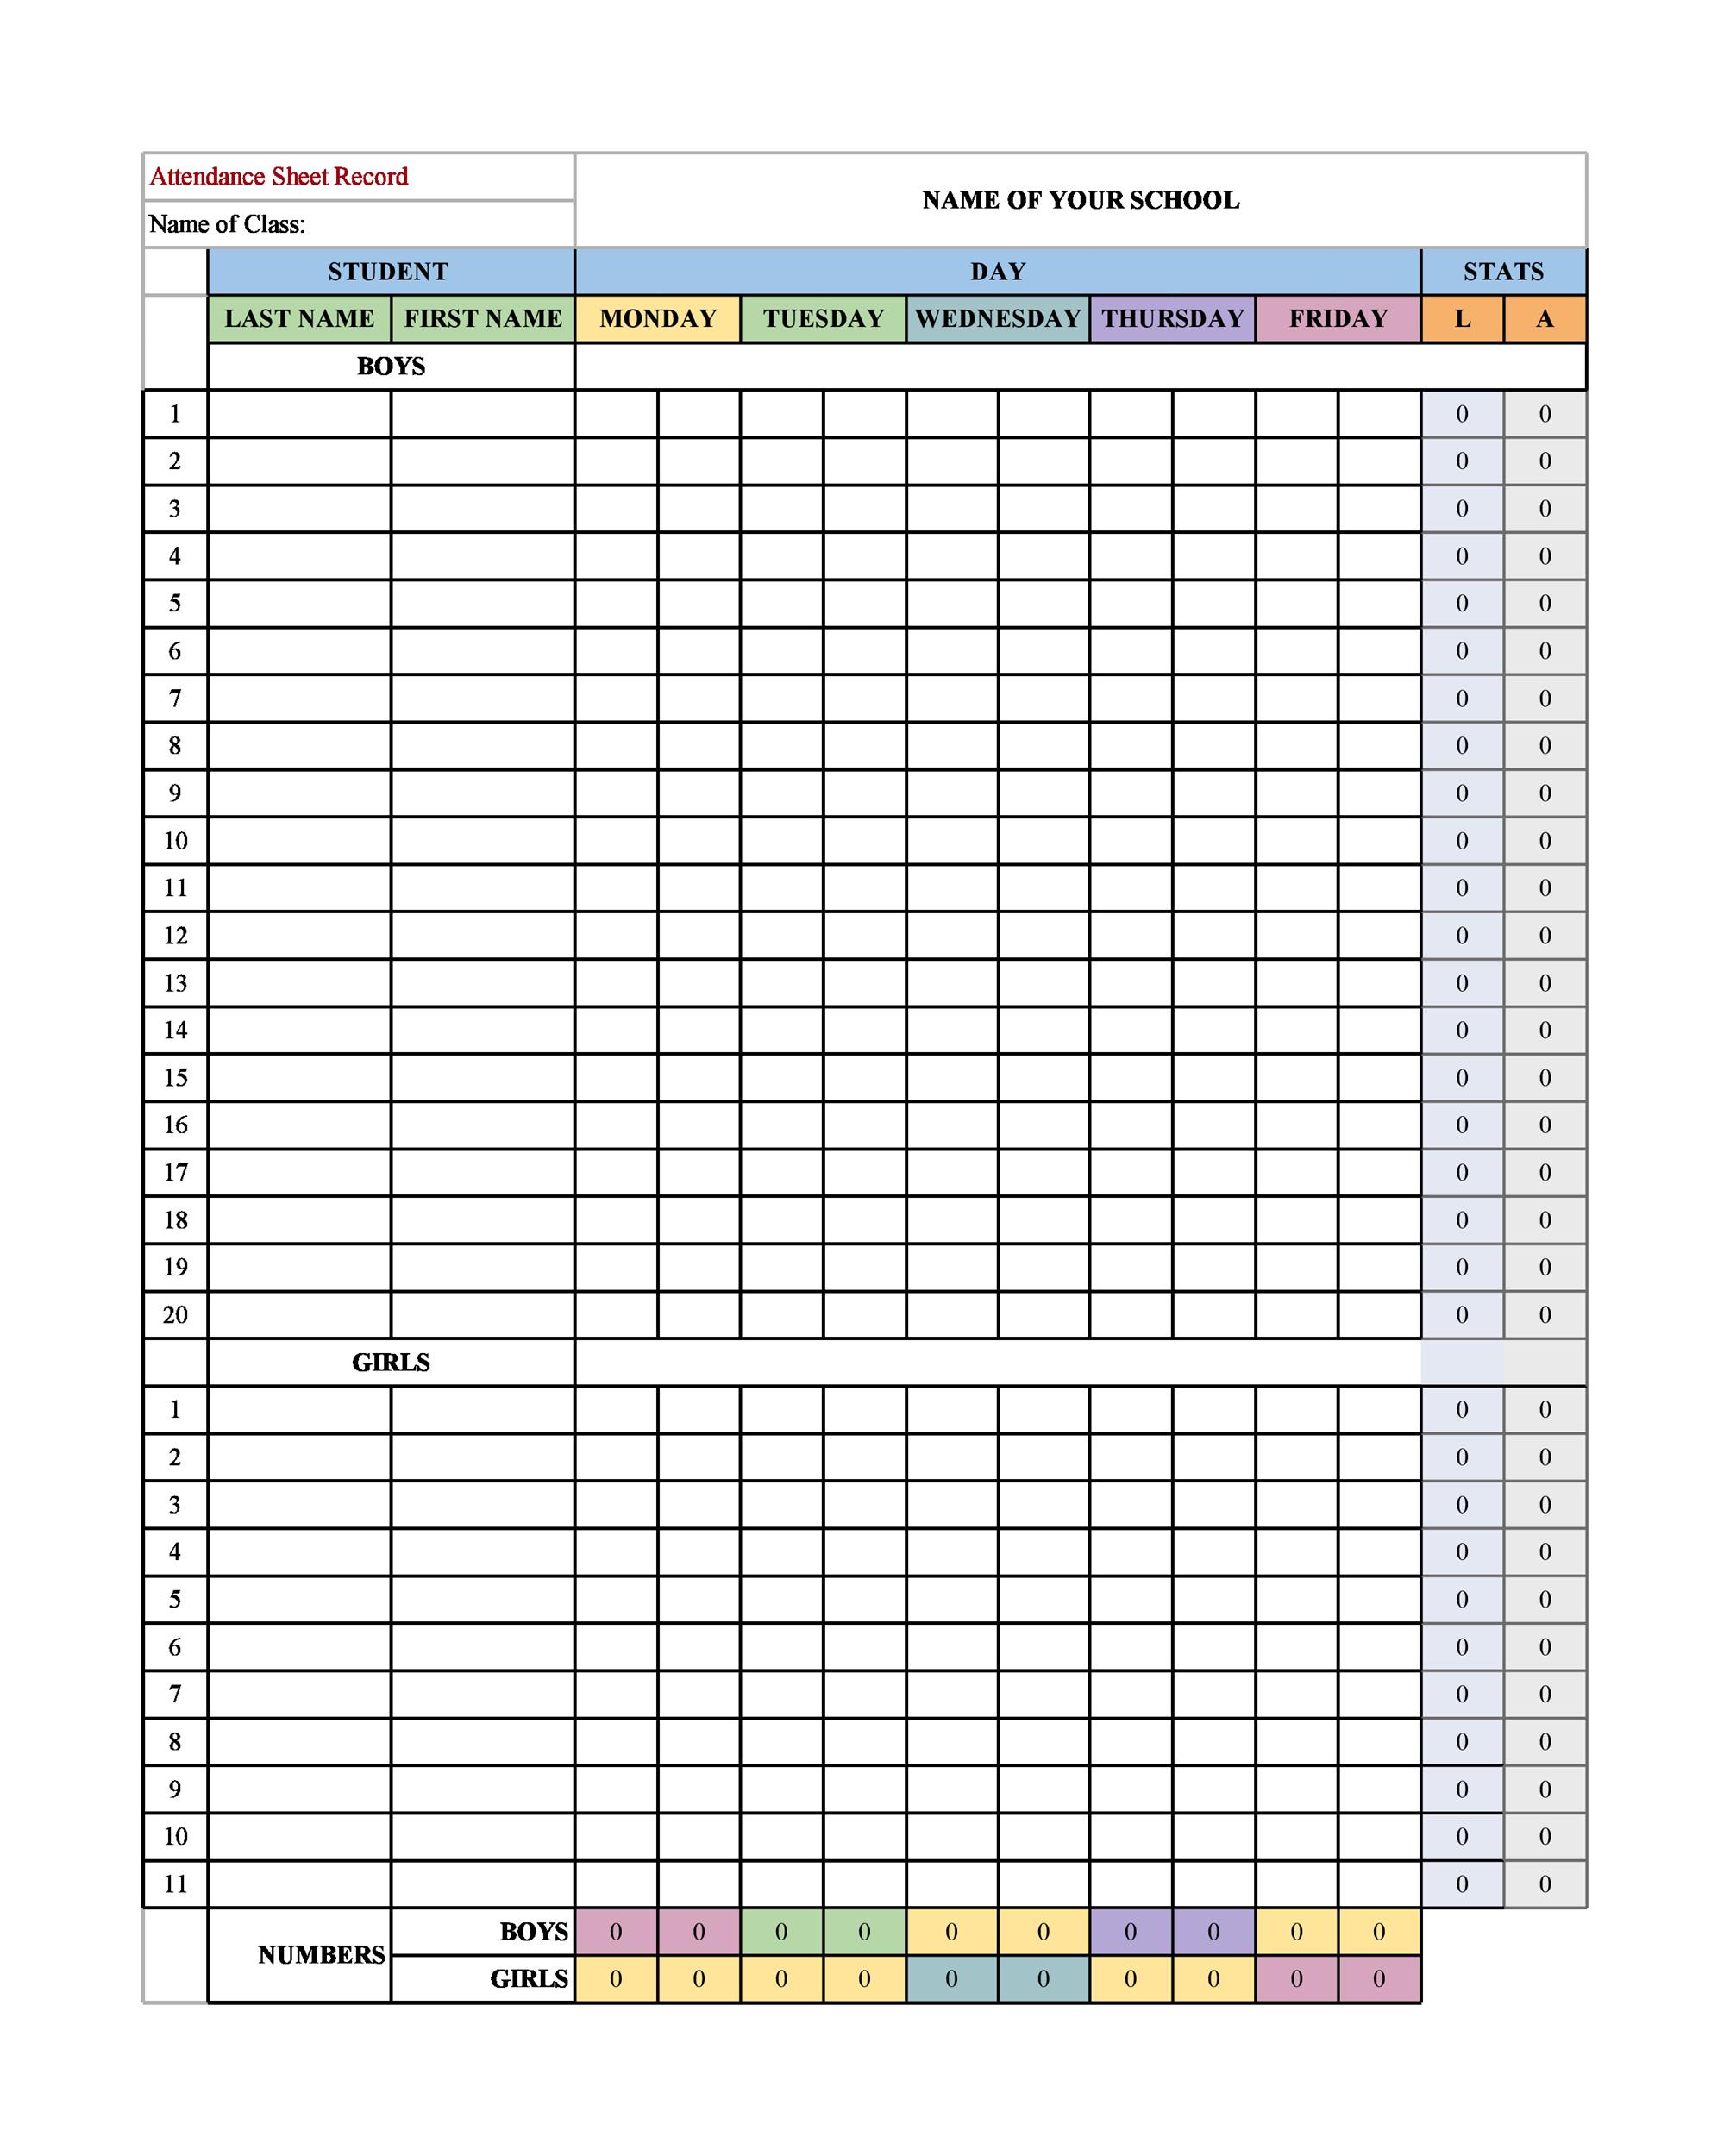 microsoft excel student attendance template